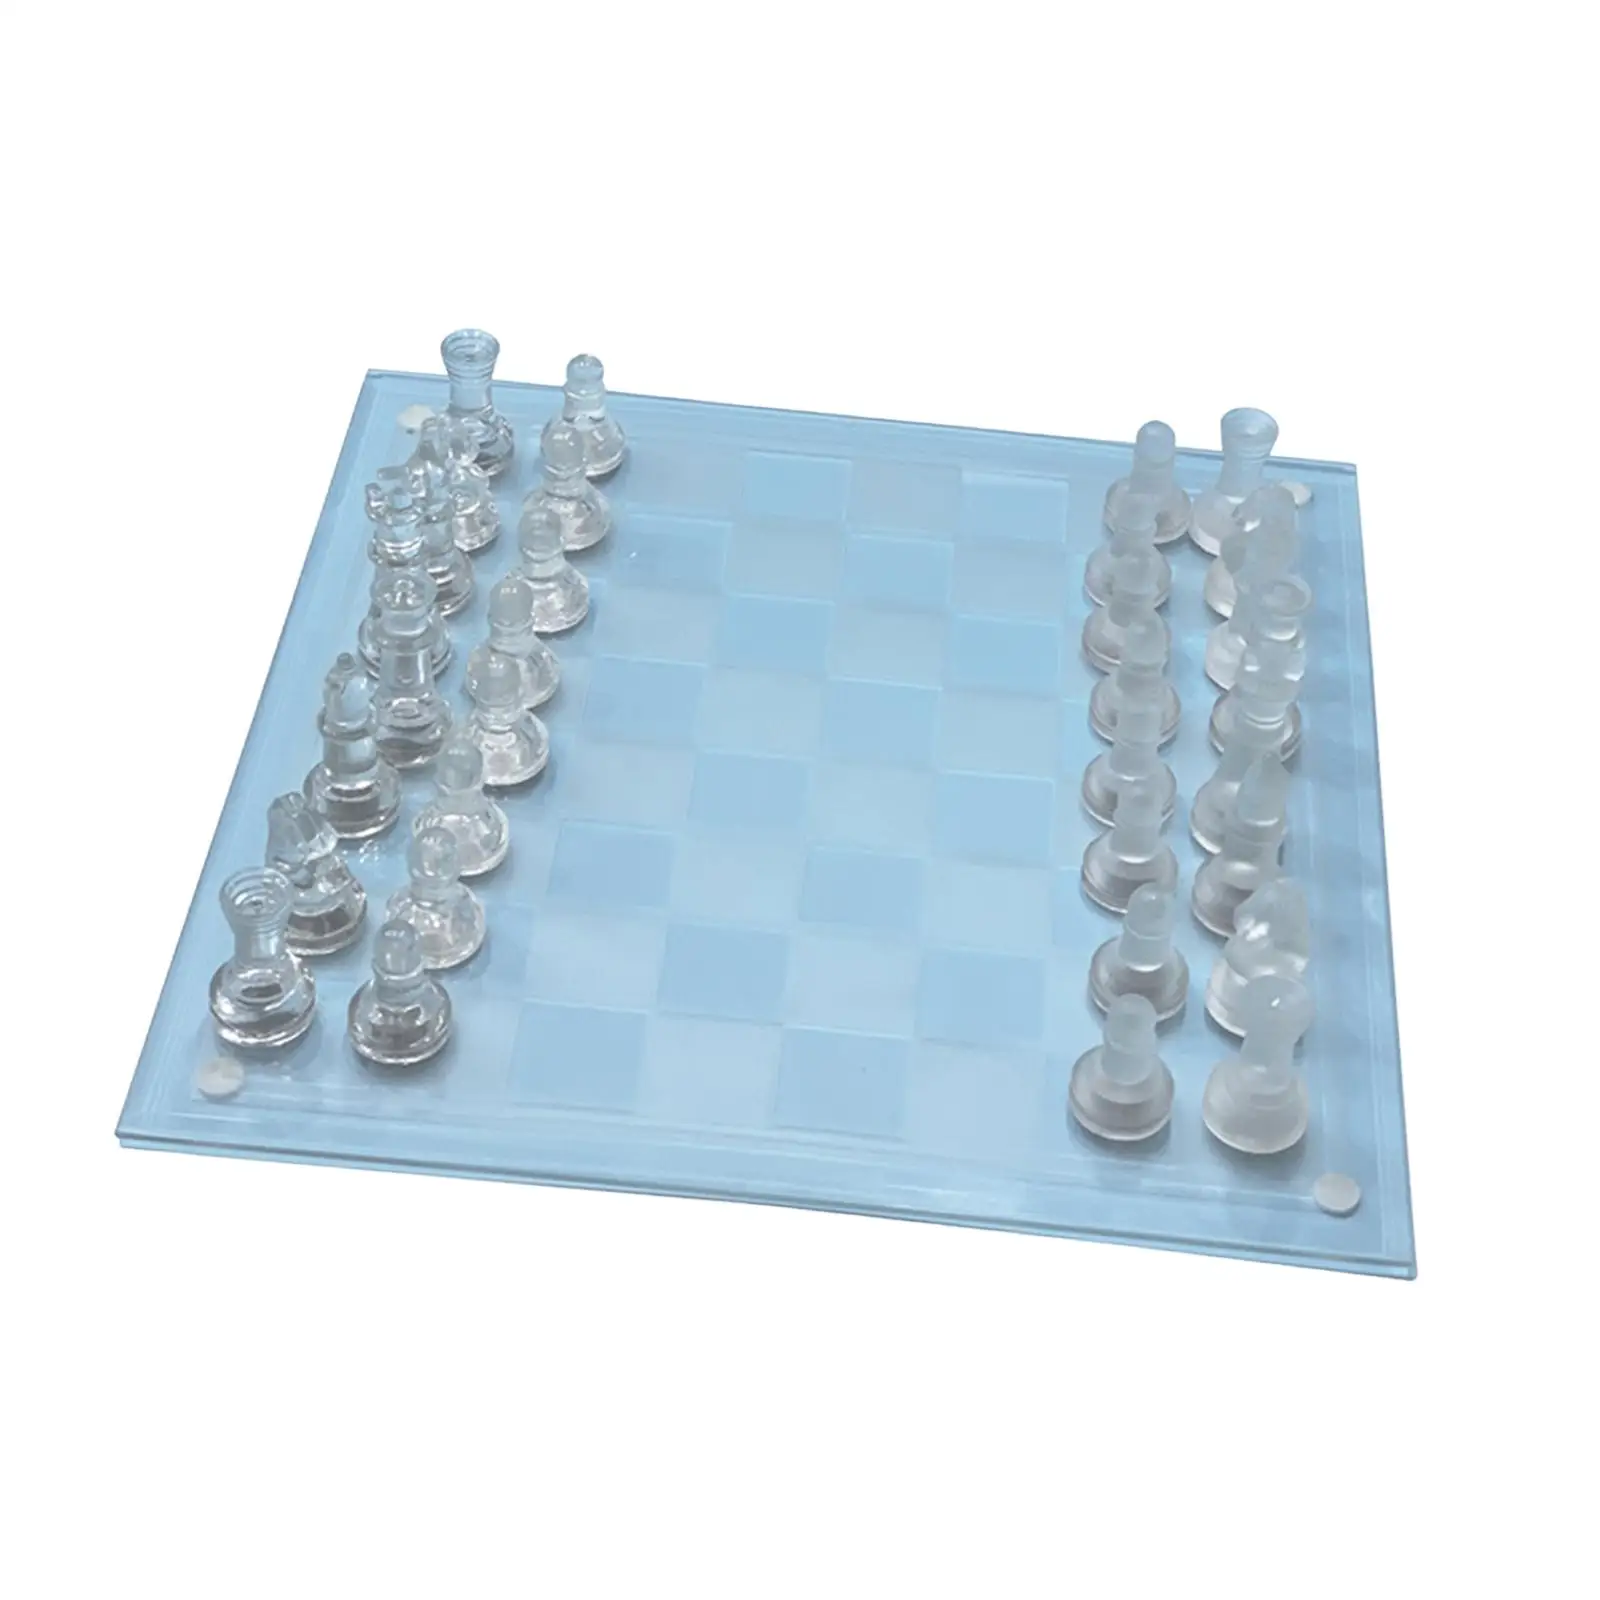 Crystal Chess Board Adults Play Set Elegant 13.78`x13.78`` Classic Strategy Game for Game Interaction Trips Party Picnics